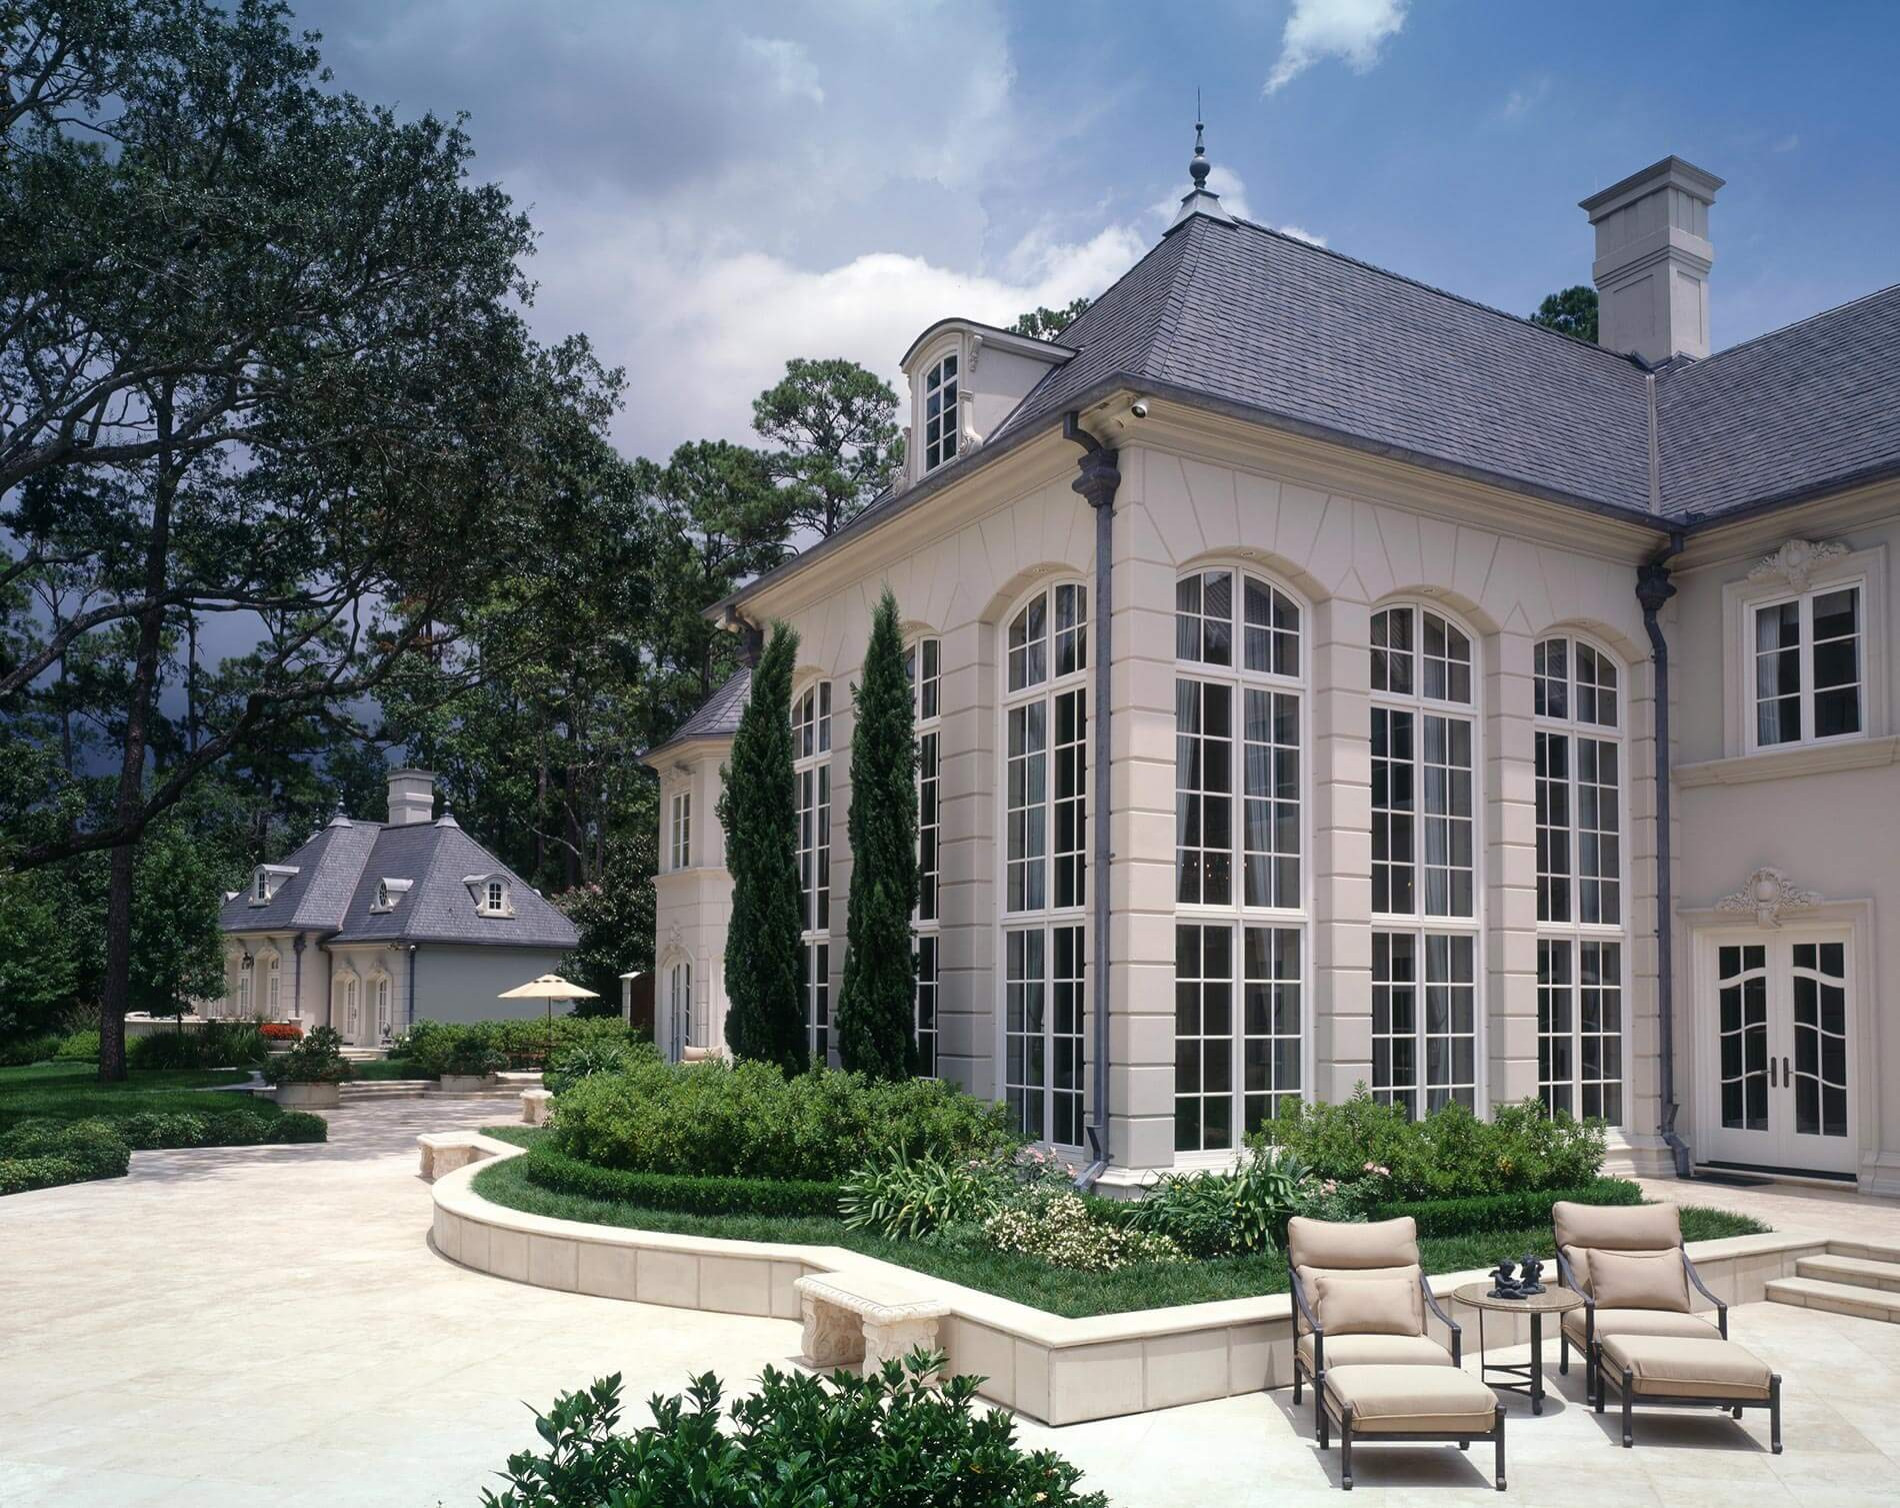 01. French Chateau